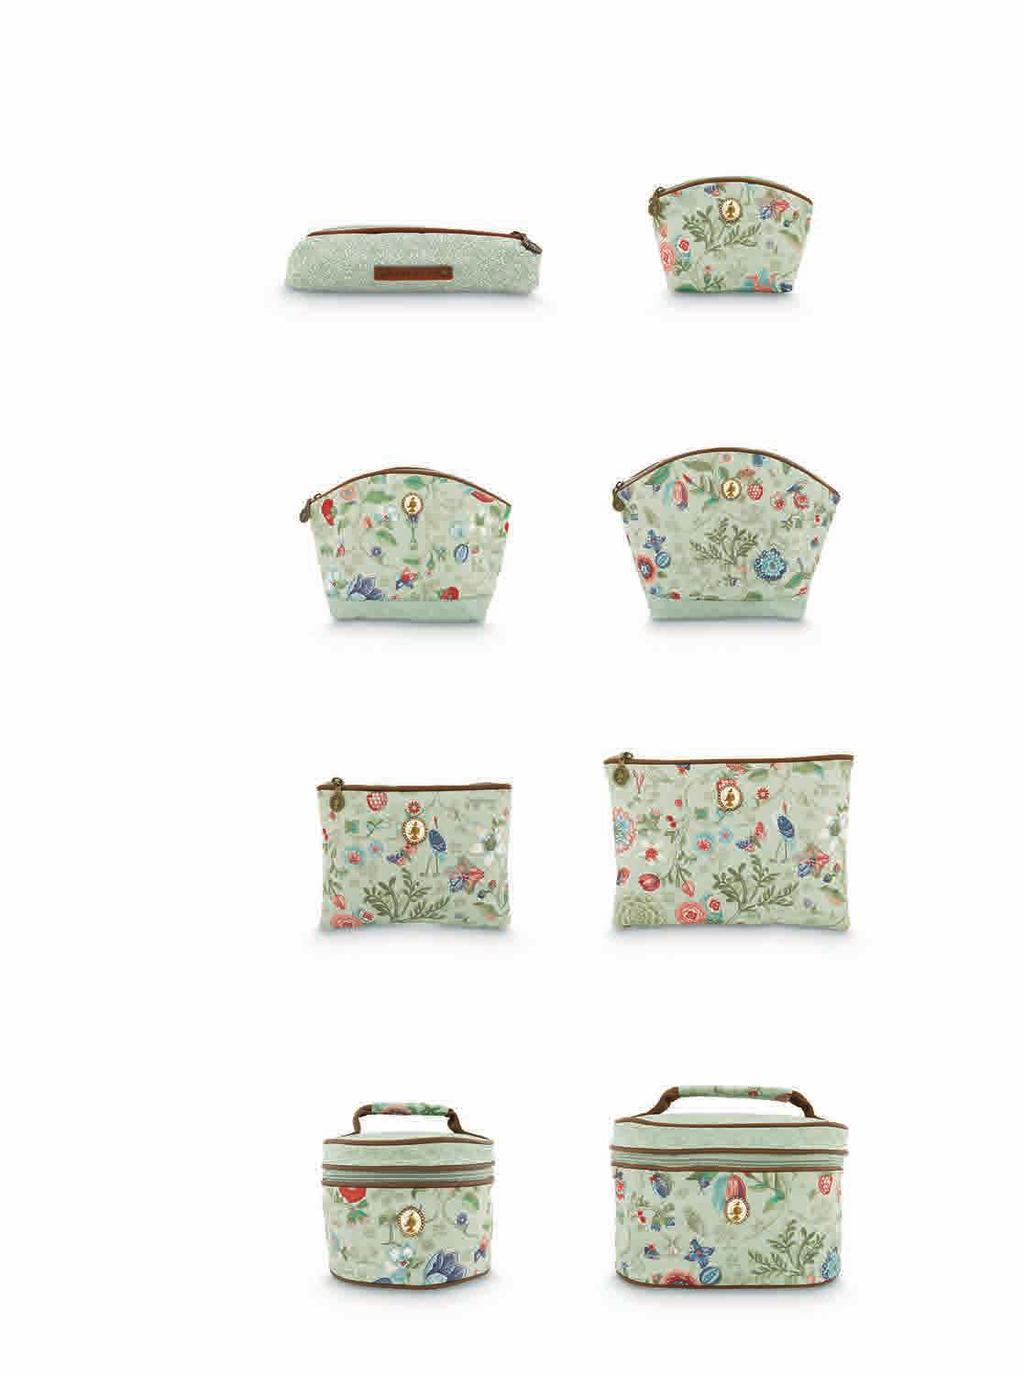 SPRING TO LIFE BATHROOM ACCESSORIES & COSMETIC BAGS 51.274.039 Cosmetic Etui Small Celadon - 4/48 51.274.048 Cosmetic Bag Small Celadon - 1/36 51.111.051 Soap Dish Celadon - 6/48 51.111.054 Bathroom Tray Celadon - 25x12 cm - 6/36 51.